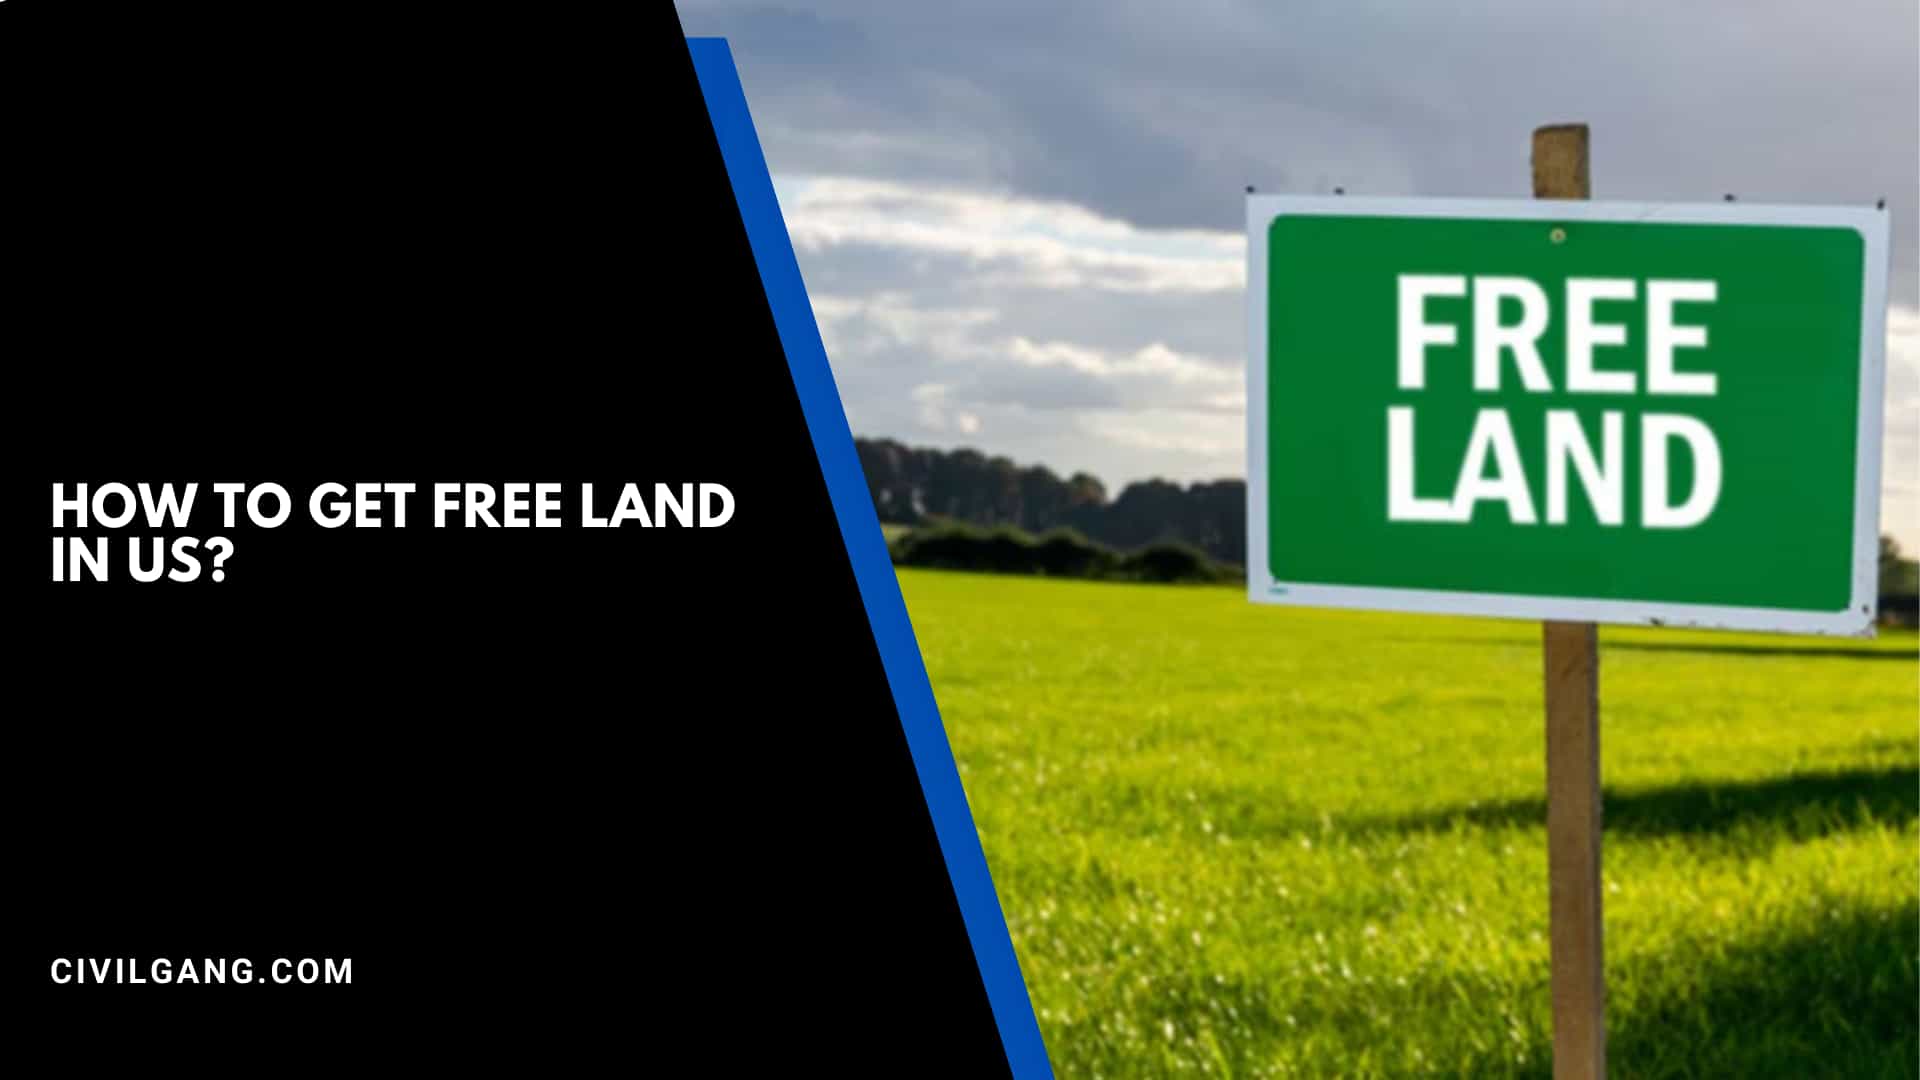 How to Get Free Land in Us?